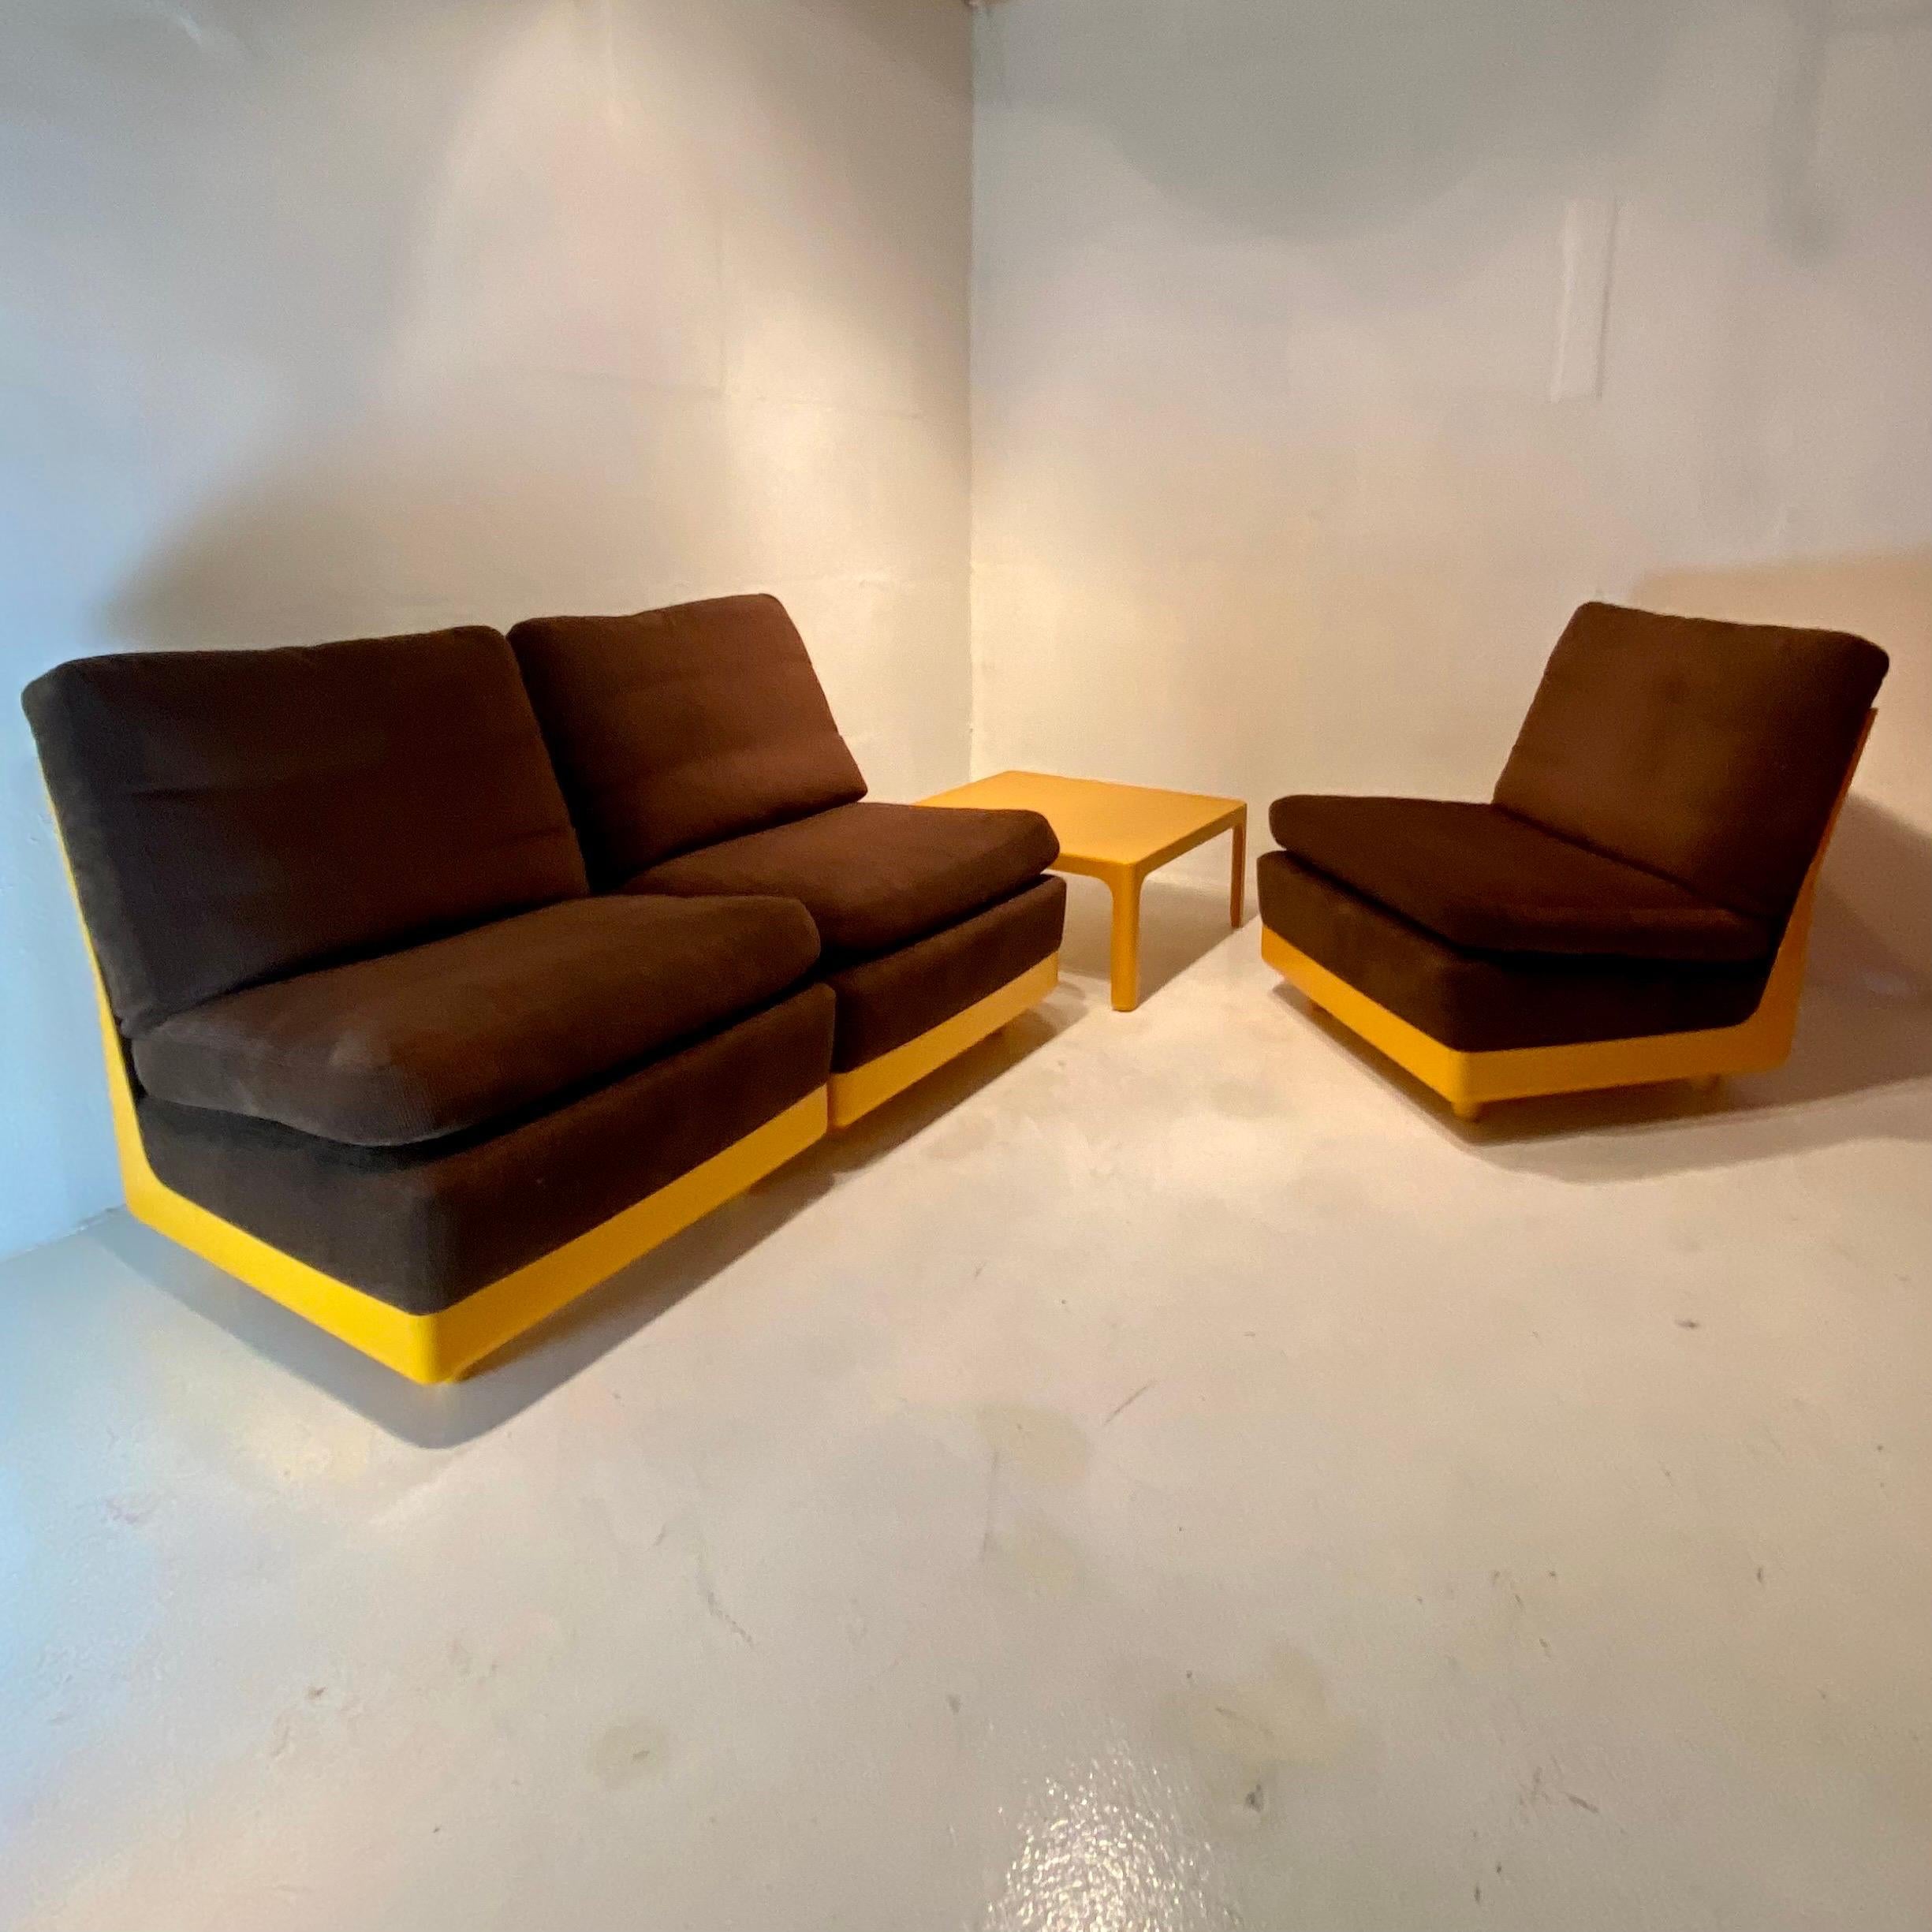 Original set of three yellow seats and coffee table by Wolfgang Feierbach 1974. For Sale 1